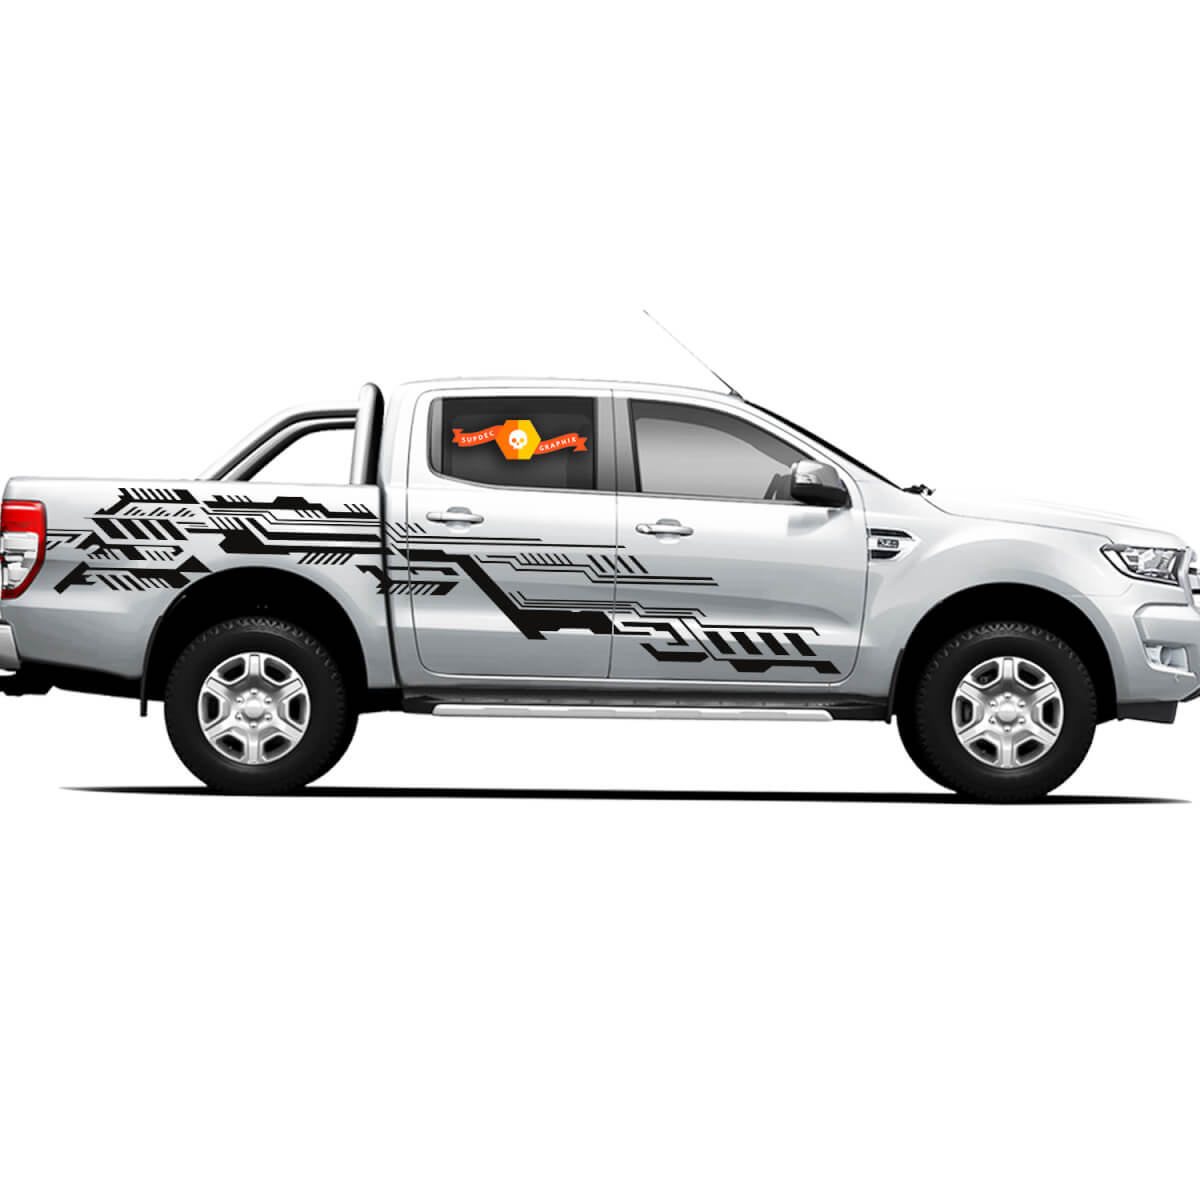 Pair Vinyl Decals Stickers 4X4 Tacoma Toyota TRD Off Road Truck side Doors Cyberpunk Lines Chaos New